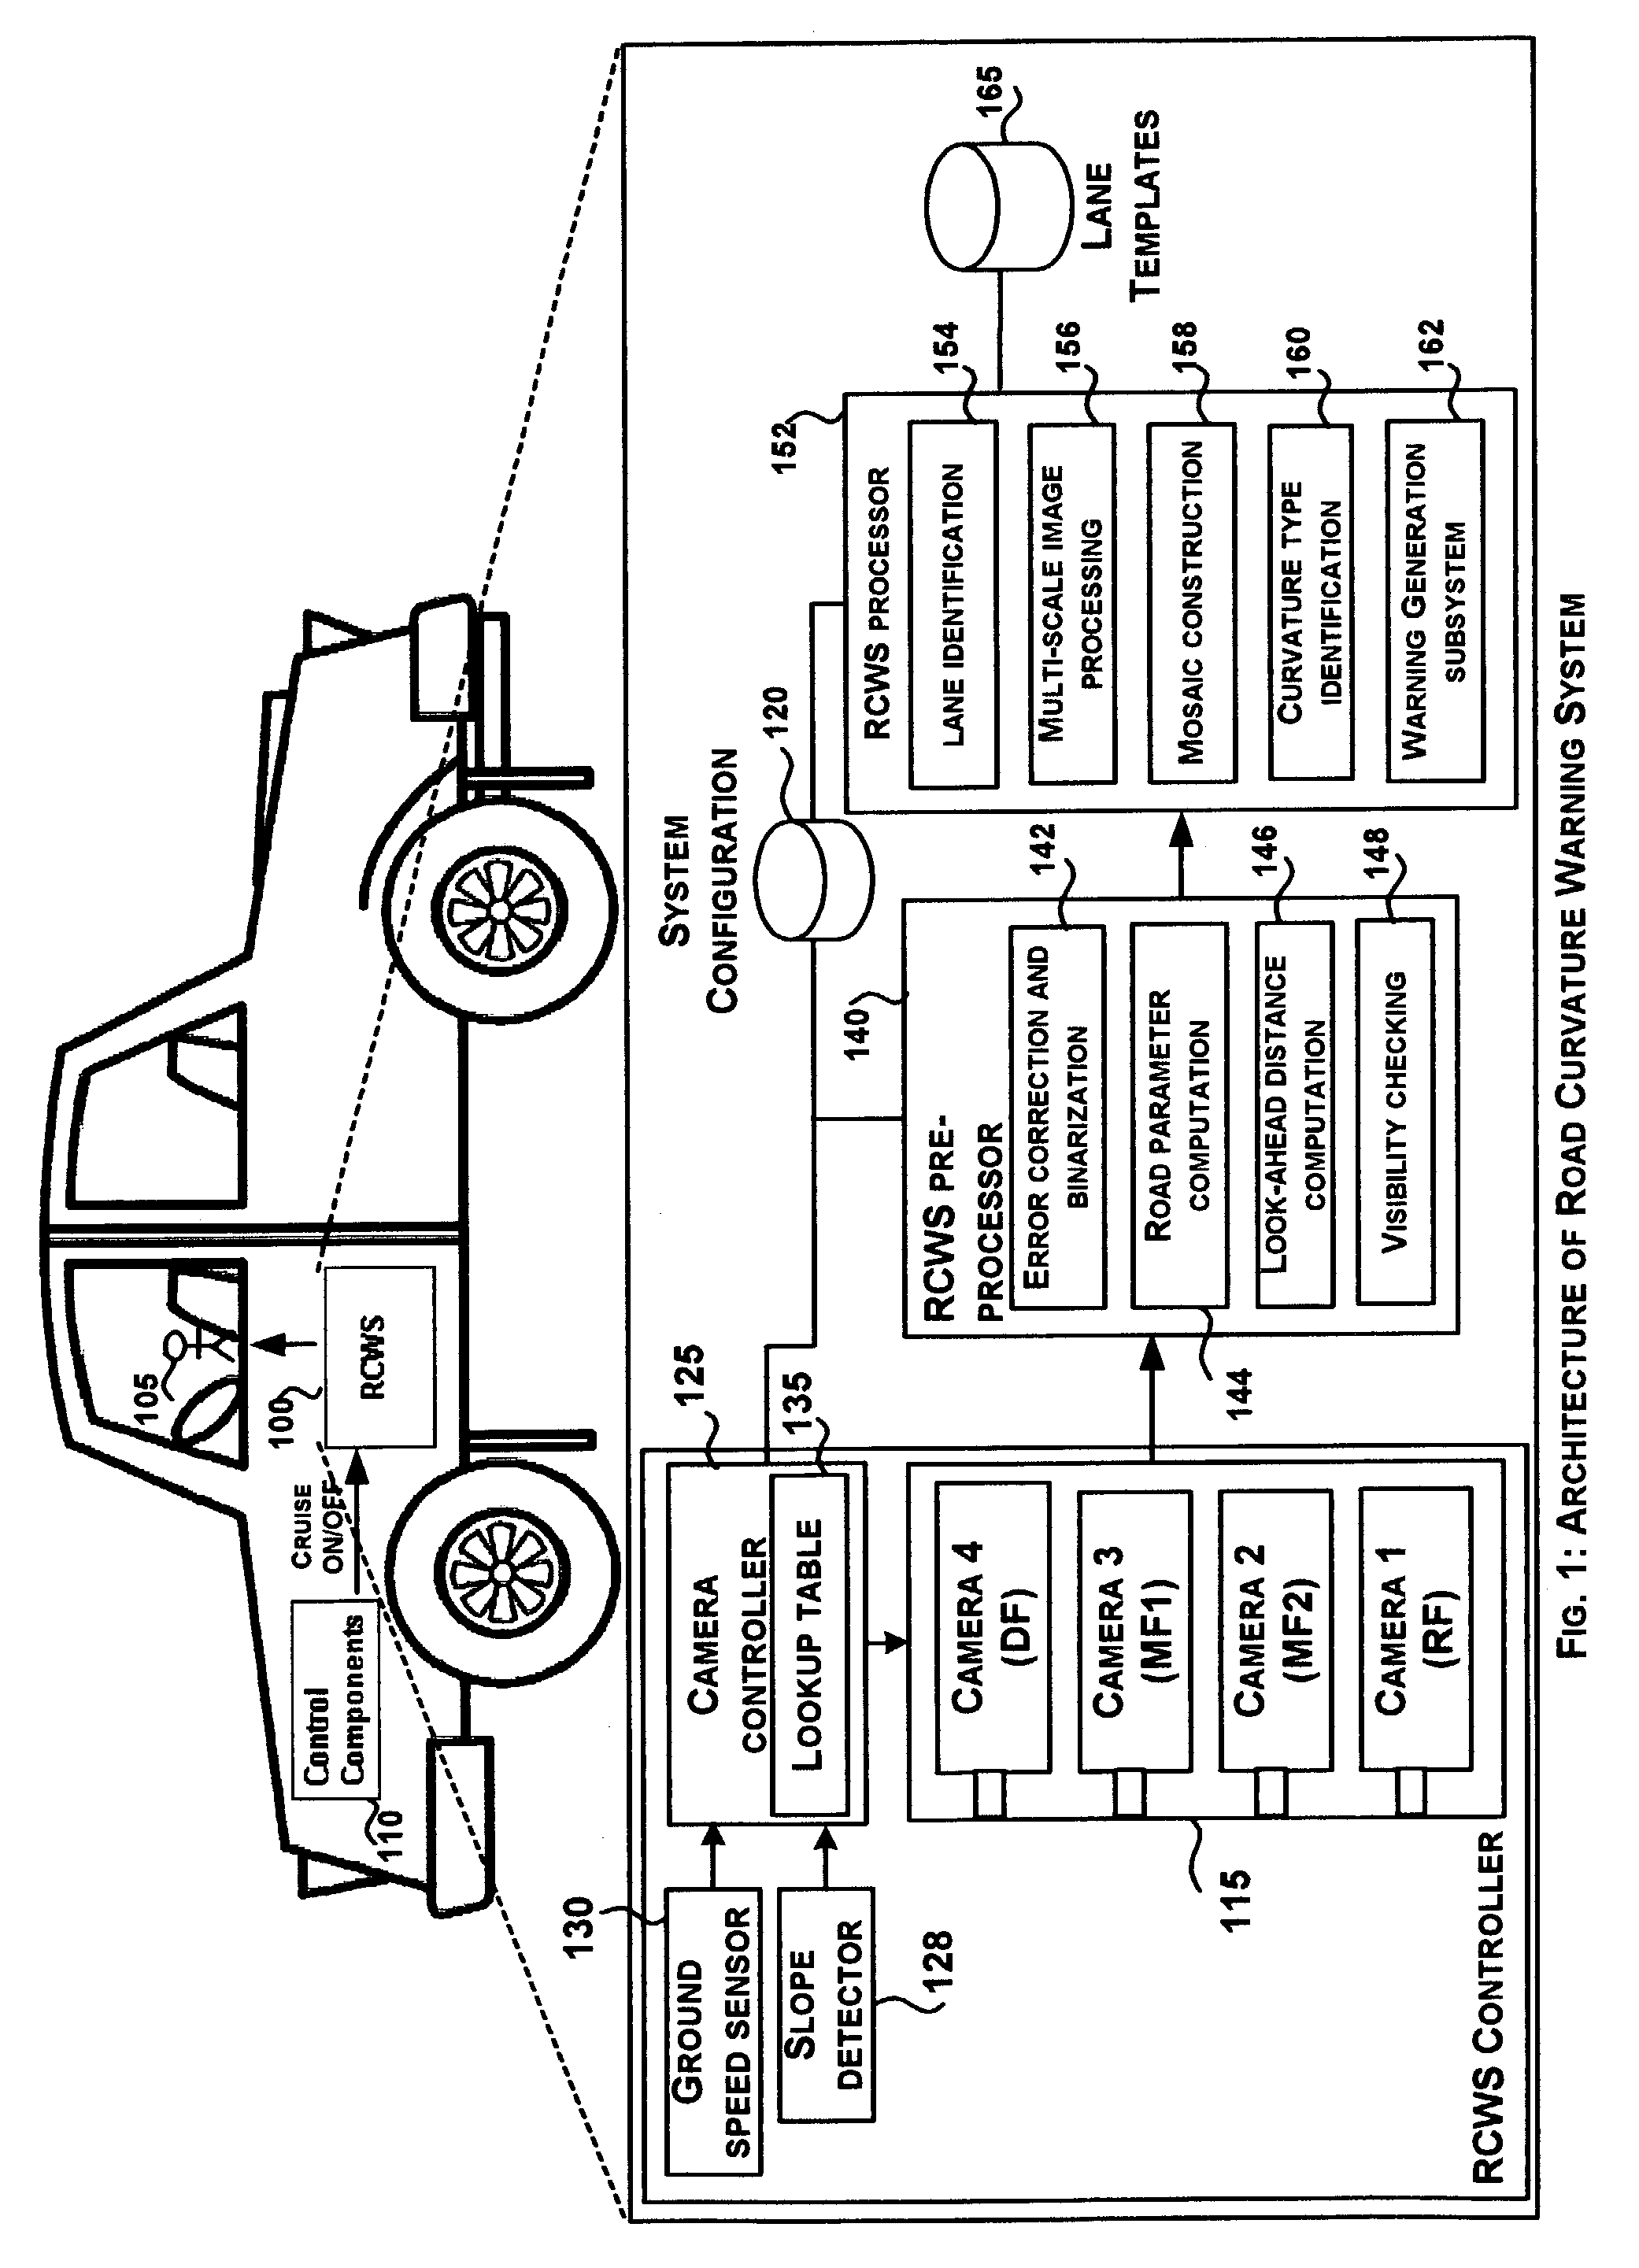 System and method for warning drivers based on road curvature